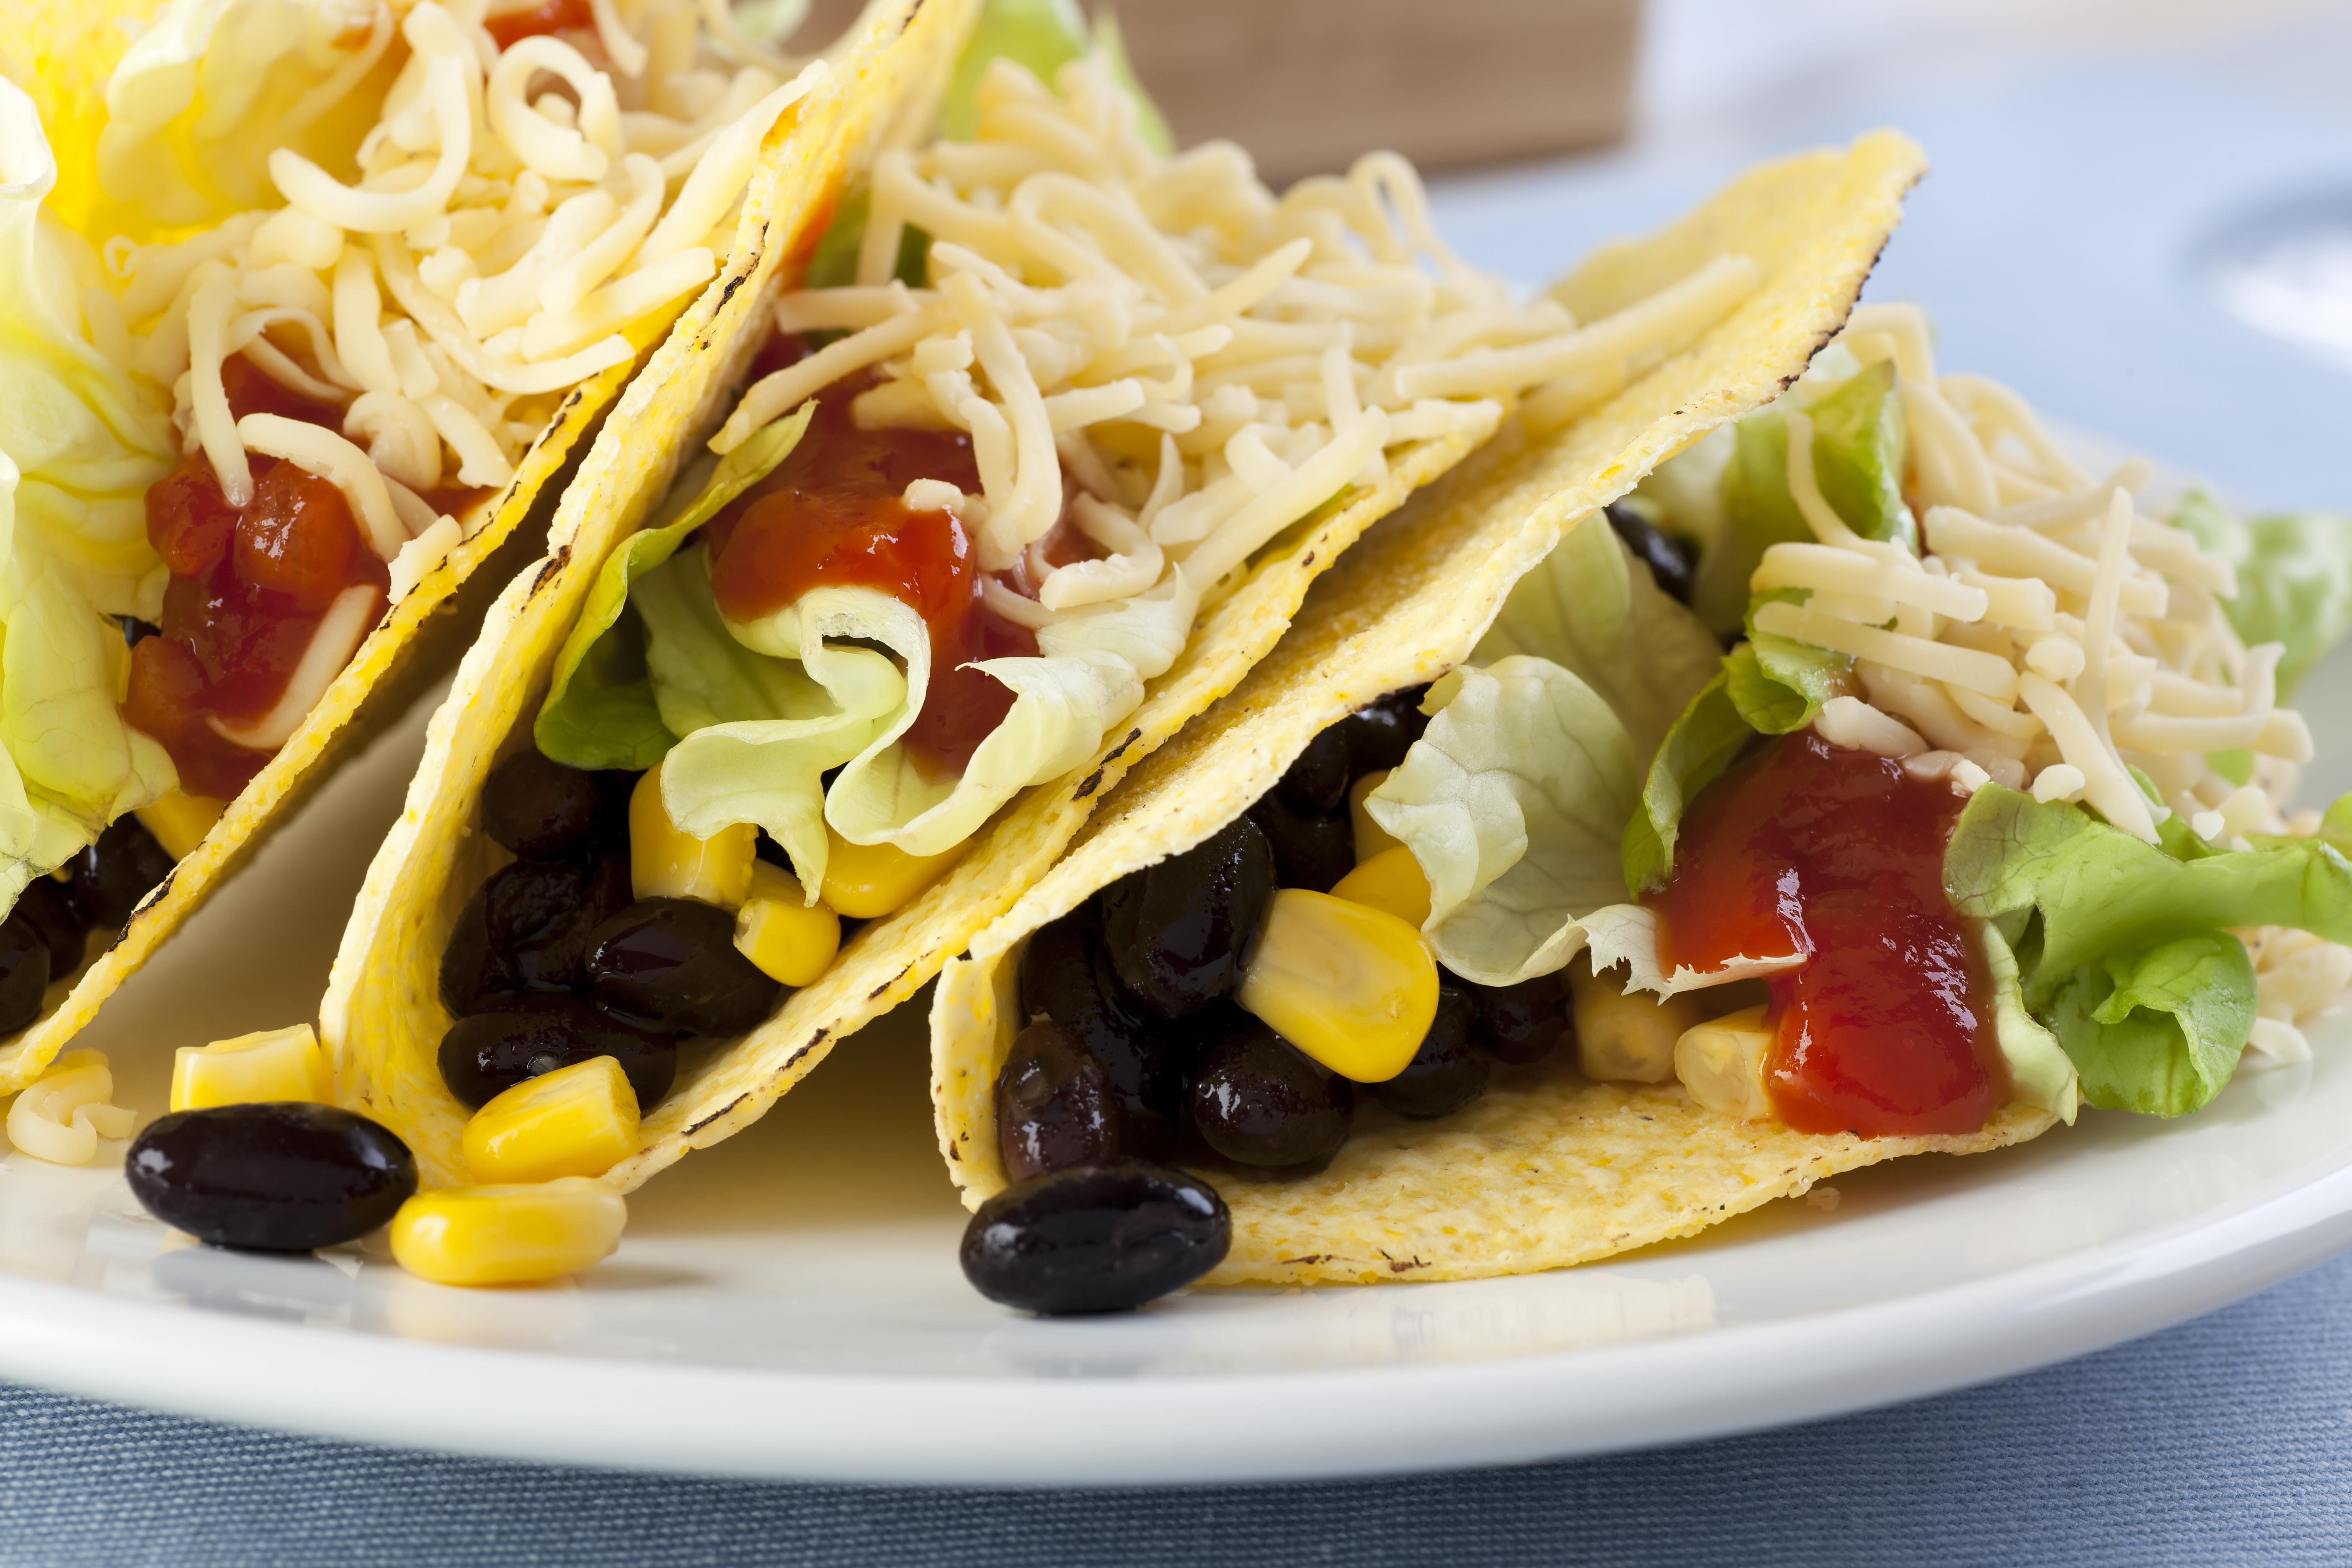 Corn taco with beans, lettuce, and cheese  (Shutterstock -- copyrighted LW download)